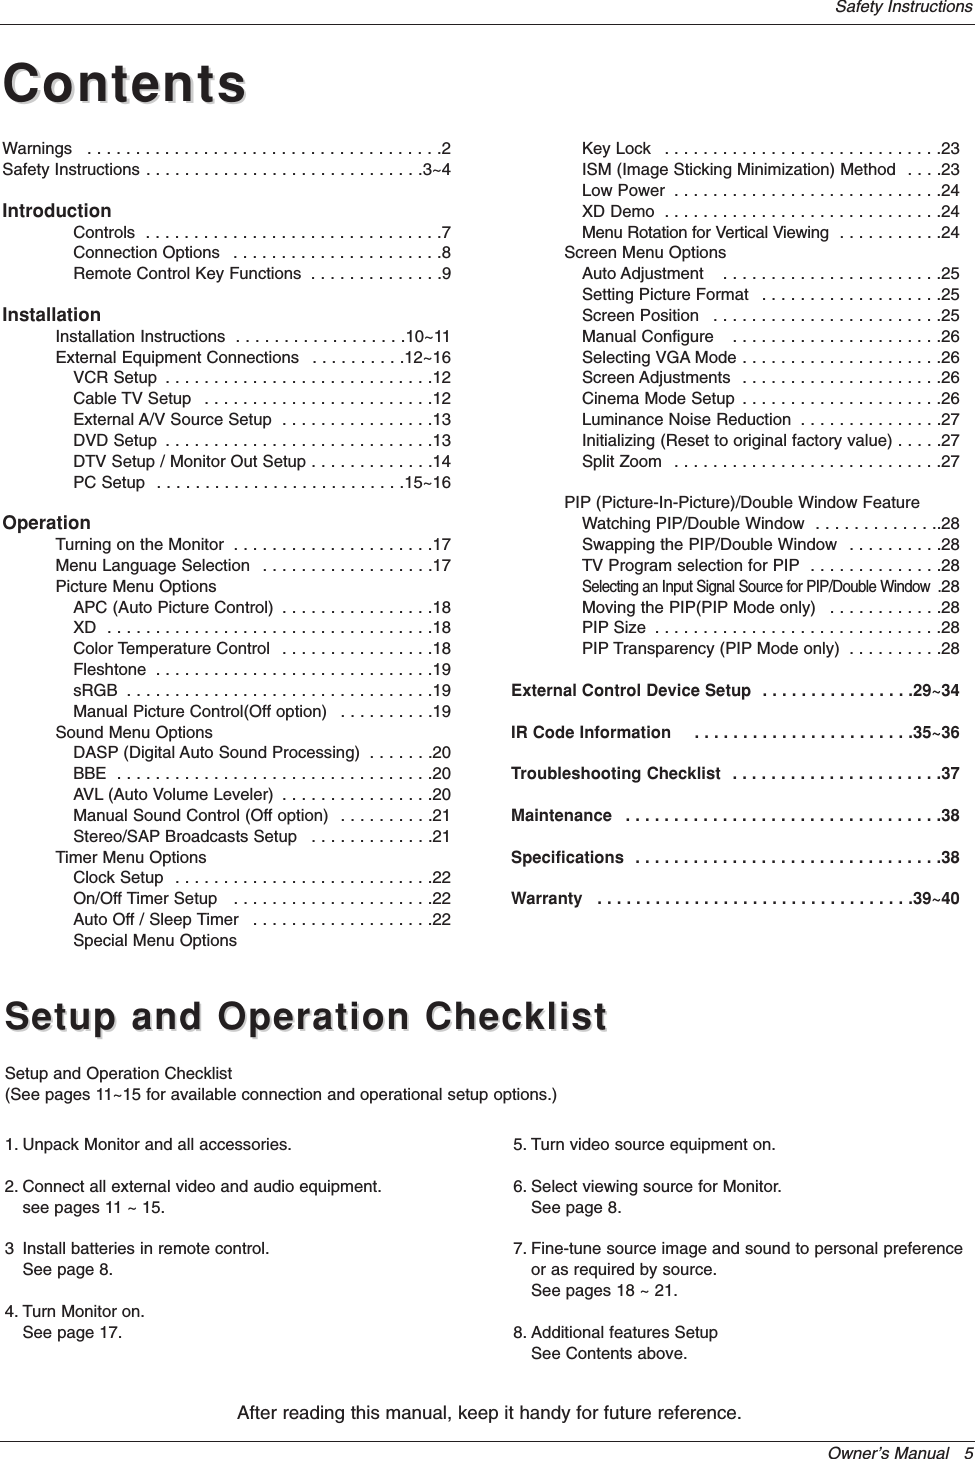 Owner’s Manual   5Safety InstructionsContentsContentsAfter reading this manual, keep it handy for future reference.Setup and Operation ChecklistSetup and Operation ChecklistSetup and Operation Checklist(See pages 11~15 for available connection and operational setup options.)1. Unpack Monitor and all accessories.2. Connect all external video and audio equipment.see pages 11 ~ 15.3 Install batteries in remote control.See page 8.4. Turn Monitor on.See page 17.5. Turn video source equipment on.6. Select viewing source for Monitor.See page 8.7. Fine-tune source image and sound to personal preferenceor as required by source. See pages 18 ~ 21.8. Additional features SetupSee Contents above.Warnings  . . . . . . . . . . . . . . . . . . . . . . . . . . . . . . . . . . . . .2Safety Instructions . . . . . . . . . . . . . . . . . . . . . . . . . . . . .3~4IntroductionControls  . . . . . . . . . . . . . . . . . . . . . . . . . . . . . . .7Connection Options  . . . . . . . . . . . . . . . . . . . . . .8Remote Control Key Functions  . . . . . . . . . . . . . .9InstallationInstallation Instructions  . . . . . . . . . . . . . . . . . .10~11External Equipment Connections  . . . . . . . . . .12~16VCR Setup  . . . . . . . . . . . . . . . . . . . . . . . . . . . .12Cable TV Setup  . . . . . . . . . . . . . . . . . . . . . . . .12External A/V Source Setup  . . . . . . . . . . . . . . . .13DVD Setup  . . . . . . . . . . . . . . . . . . . . . . . . . . . .13DTV Setup / Monitor Out Setup . . . . . . . . . . . . .14PC Setup  . . . . . . . . . . . . . . . . . . . . . . . . . .15~16OperationTurning on the Monitor  . . . . . . . . . . . . . . . . . . . . .17Menu Language Selection  . . . . . . . . . . . . . . . . . .17Picture Menu OptionsAPC (Auto Picture Control)  . . . . . . . . . . . . . . . .18XD  . . . . . . . . . . . . . . . . . . . . . . . . . . . . . . . . . .18Color Temperature Control  . . . . . . . . . . . . . . . .18Fleshtone  . . . . . . . . . . . . . . . . . . . . . . . . . . . . .19sRGB  . . . . . . . . . . . . . . . . . . . . . . . . . . . . . . . .19Manual Picture Control(Off option)  . . . . . . . . . .19Sound Menu OptionsDASP (Digital Auto Sound Processing)  . . . . . . .20BBE  . . . . . . . . . . . . . . . . . . . . . . . . . . . . . . . . .20AVL (Auto Volume Leveler)  . . . . . . . . . . . . . . . .20Manual Sound Control (Off option)  . . . . . . . . . .21Stereo/SAP Broadcasts Setup  . . . . . . . . . . . . .21Timer Menu OptionsClock Setup  . . . . . . . . . . . . . . . . . . . . . . . . . . .22On/Off Timer Setup   . . . . . . . . . . . . . . . . . . . . .22Auto Off / Sleep Timer  . . . . . . . . . . . . . . . . . . .22Special Menu OptionsKey Lock  . . . . . . . . . . . . . . . . . . . . . . . . . . . . .23ISM (Image Sticking Minimization) Method  . . . .23Low Power  . . . . . . . . . . . . . . . . . . . . . . . . . . . .24XD Demo  . . . . . . . . . . . . . . . . . . . . . . . . . . . . .24Menu Rotation for Vertical Viewing  . . . . . . . . . . .24Screen Menu OptionsAuto Adjustment   . . . . . . . . . . . . . . . . . . . . . . .25Setting Picture Format  . . . . . . . . . . . . . . . . . . .25Screen Position   . . . . . . . . . . . . . . . . . . . . . . . .25Manual Configure   . . . . . . . . . . . . . . . . . . . . . .26Selecting VGA Mode . . . . . . . . . . . . . . . . . . . . .26Screen Adjustments  . . . . . . . . . . . . . . . . . . . . .26Cinema Mode Setup  . . . . . . . . . . . . . . . . . . . . .26Luminance Noise Reduction  . . . . . . . . . . . . . . .27Initializing (Reset to original factory value) . . . . .27Split Zoom  . . . . . . . . . . . . . . . . . . . . . . . . . . . .27PIP (Picture-In-Picture)/Double Window FeatureWatching PIP/Double Window  . . . . . . . . . . . . ..28Swapping the PIP/Double Window  . . . . . . . . . .28TV Program selection for PIP  . . . . . . . . . . . . . .28Selecting an Input Signal Source for PIP/Double Window  .28Moving the PIP(PIP Mode only)  . . . . . . . . . . . .28PIP Size  . . . . . . . . . . . . . . . . . . . . . . . . . . . . . .28PIP Transparency (PIP Mode only)  . . . . . . . . . .28External Control Device Setup  . . . . . . . . . . . . . . . .29~34IR Code Information    . . . . . . . . . . . . . . . . . . . . . . .35~36Troubleshooting Checklist  . . . . . . . . . . . . . . . . . . . . . .37Maintenance  . . . . . . . . . . . . . . . . . . . . . . . . . . . . . . . . .38Specifications  . . . . . . . . . . . . . . . . . . . . . . . . . . . . . . . .38Warranty  . . . . . . . . . . . . . . . . . . . . . . . . . . . . . . . . .39~40